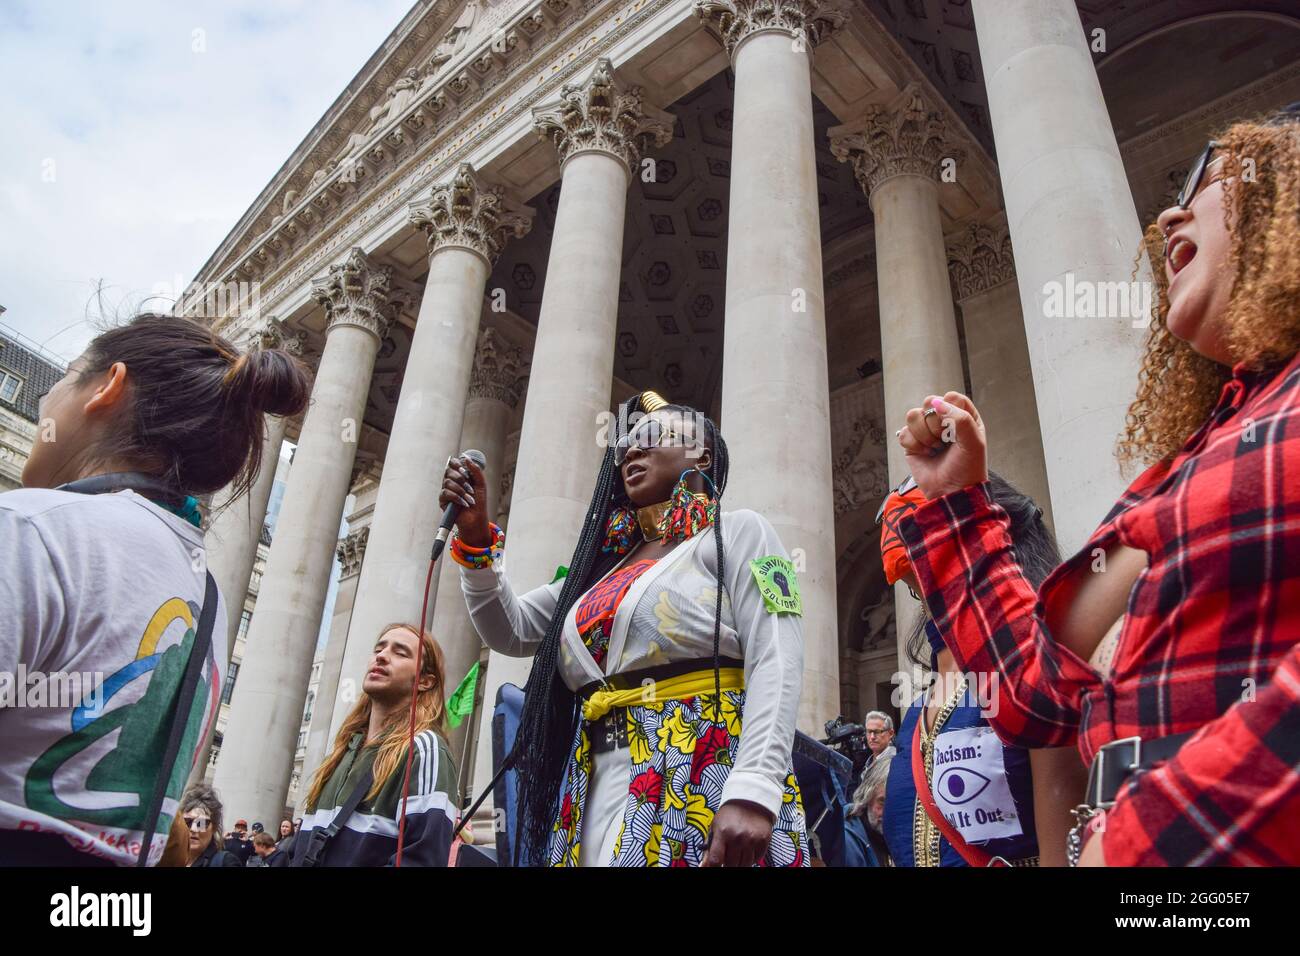 London, United Kingdom. 27th August 2021. Activist Marvina Newton speaks to Extinction Rebellion protesters outside The Royal Exchange, part of their Blood Money March targeting the City of London. (Credit: Vuk Valcic / Alamy Live News) Stock Photo